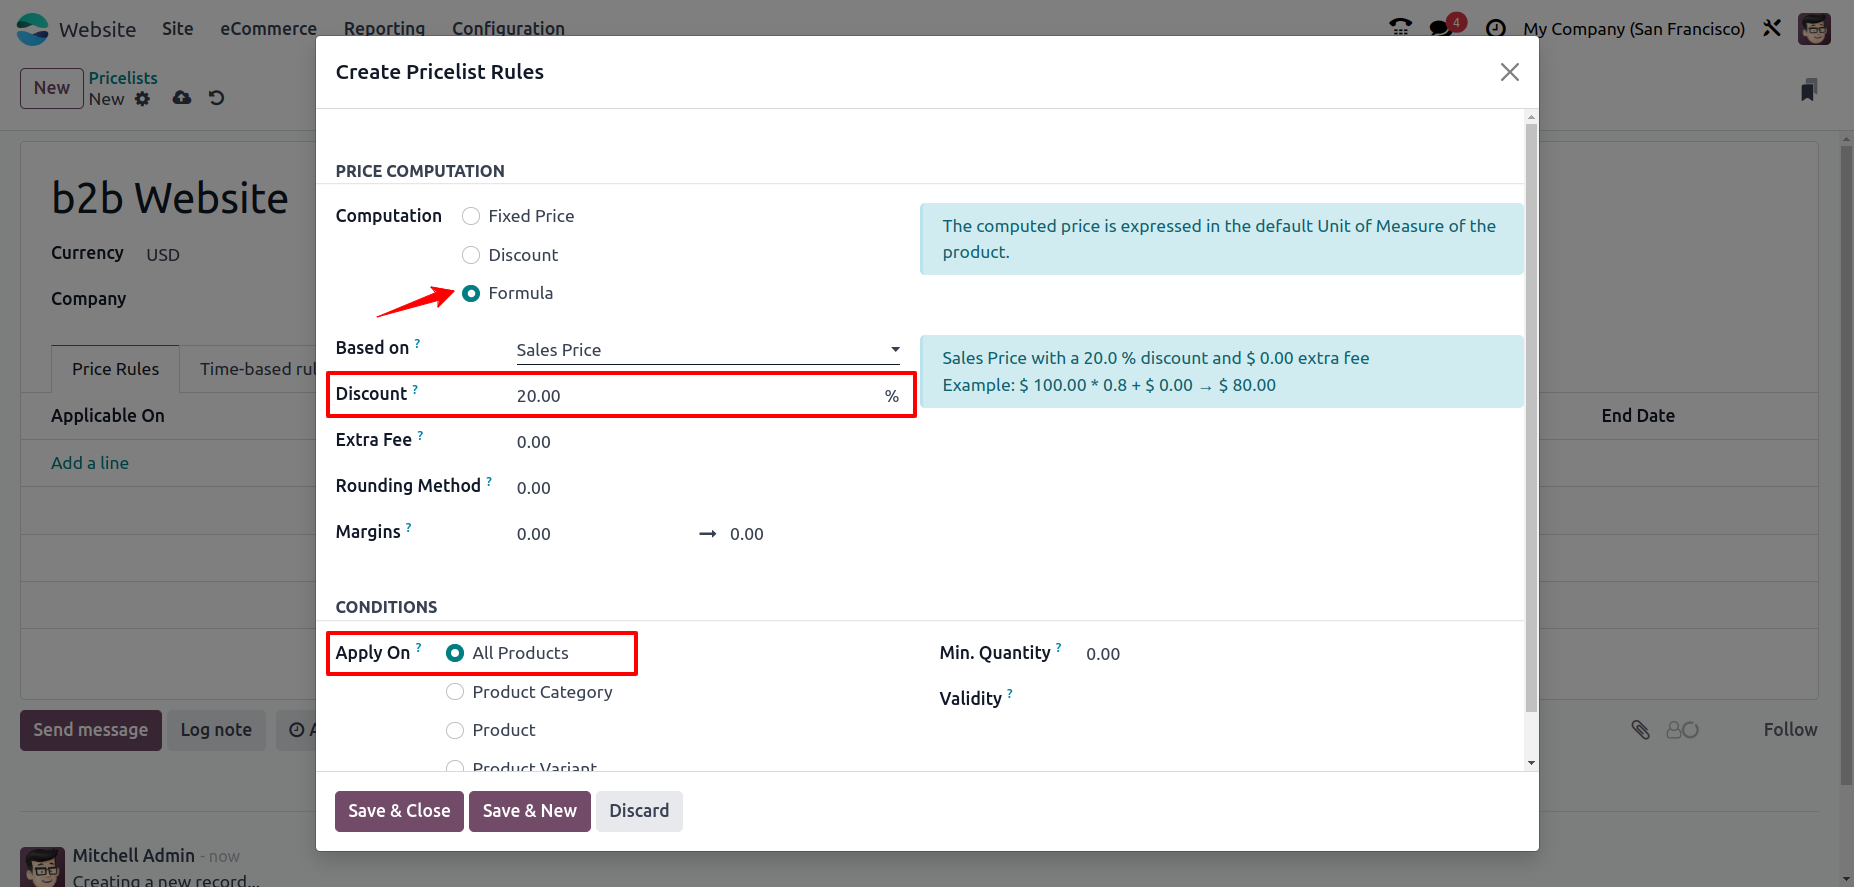 odoo ecommerce pricelist rules for product